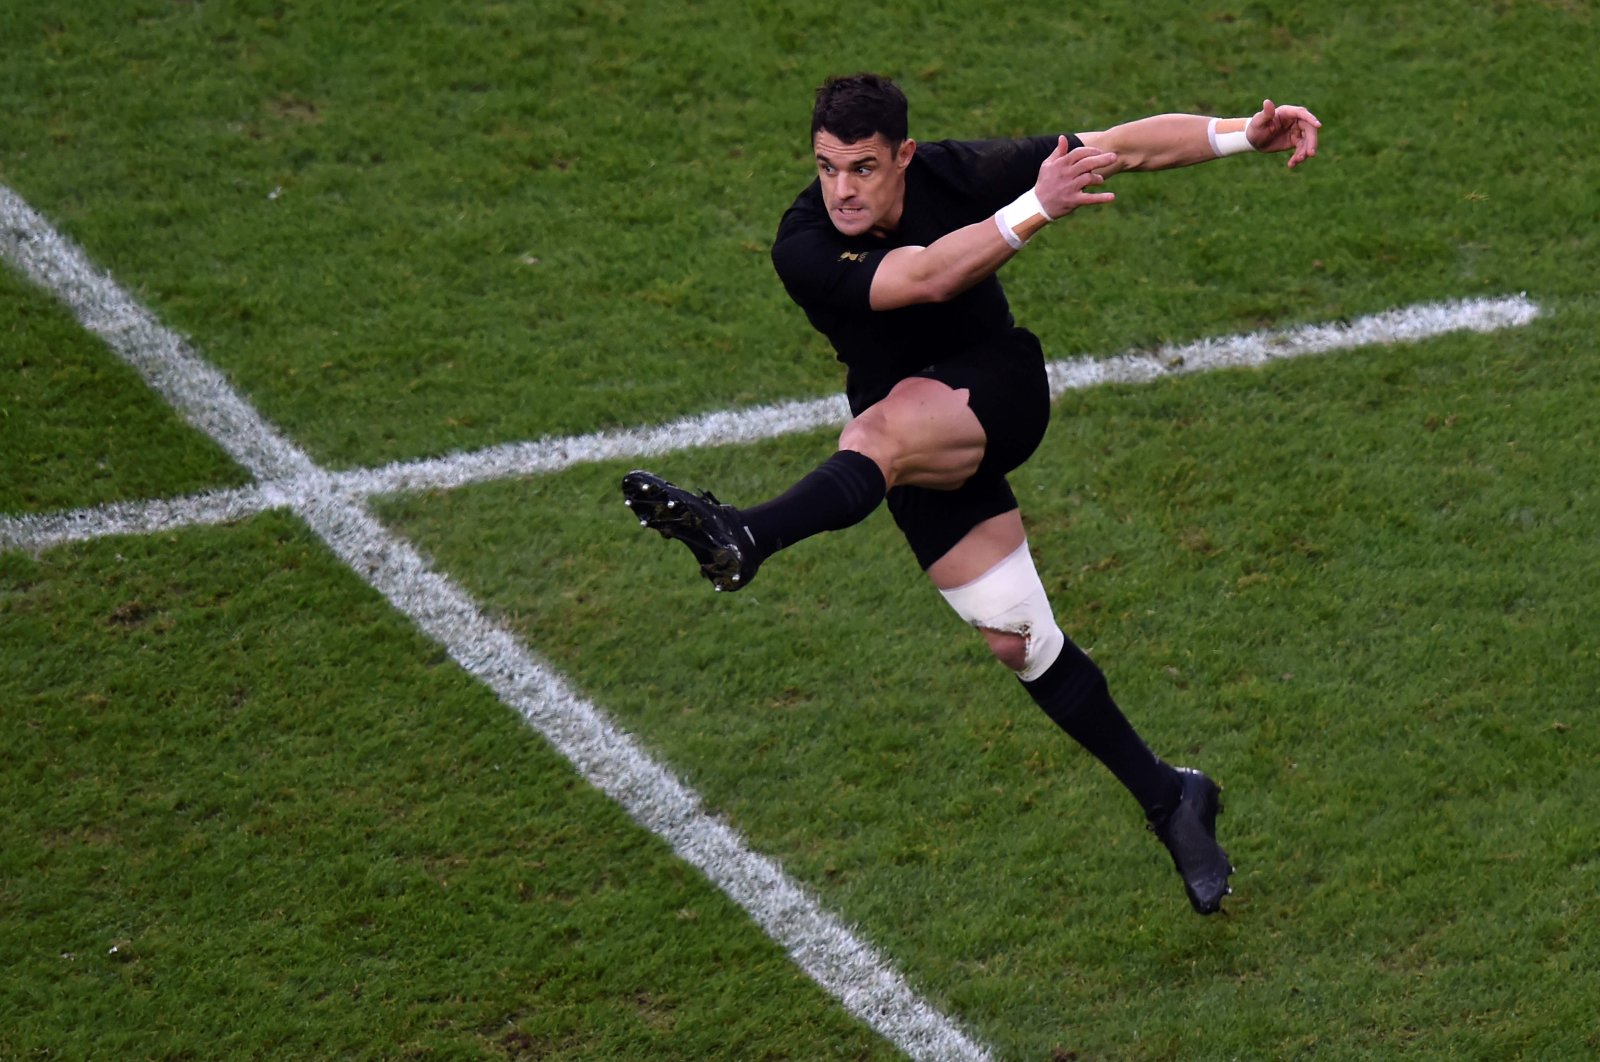 New Zealand's fly half Dan Carter kicks the ball during the final match of the 2015 Rugby World Cup between New Zealand and Australia at Twickenham stadium, south west London, Nov. 1, 2015. (AFP Photo)